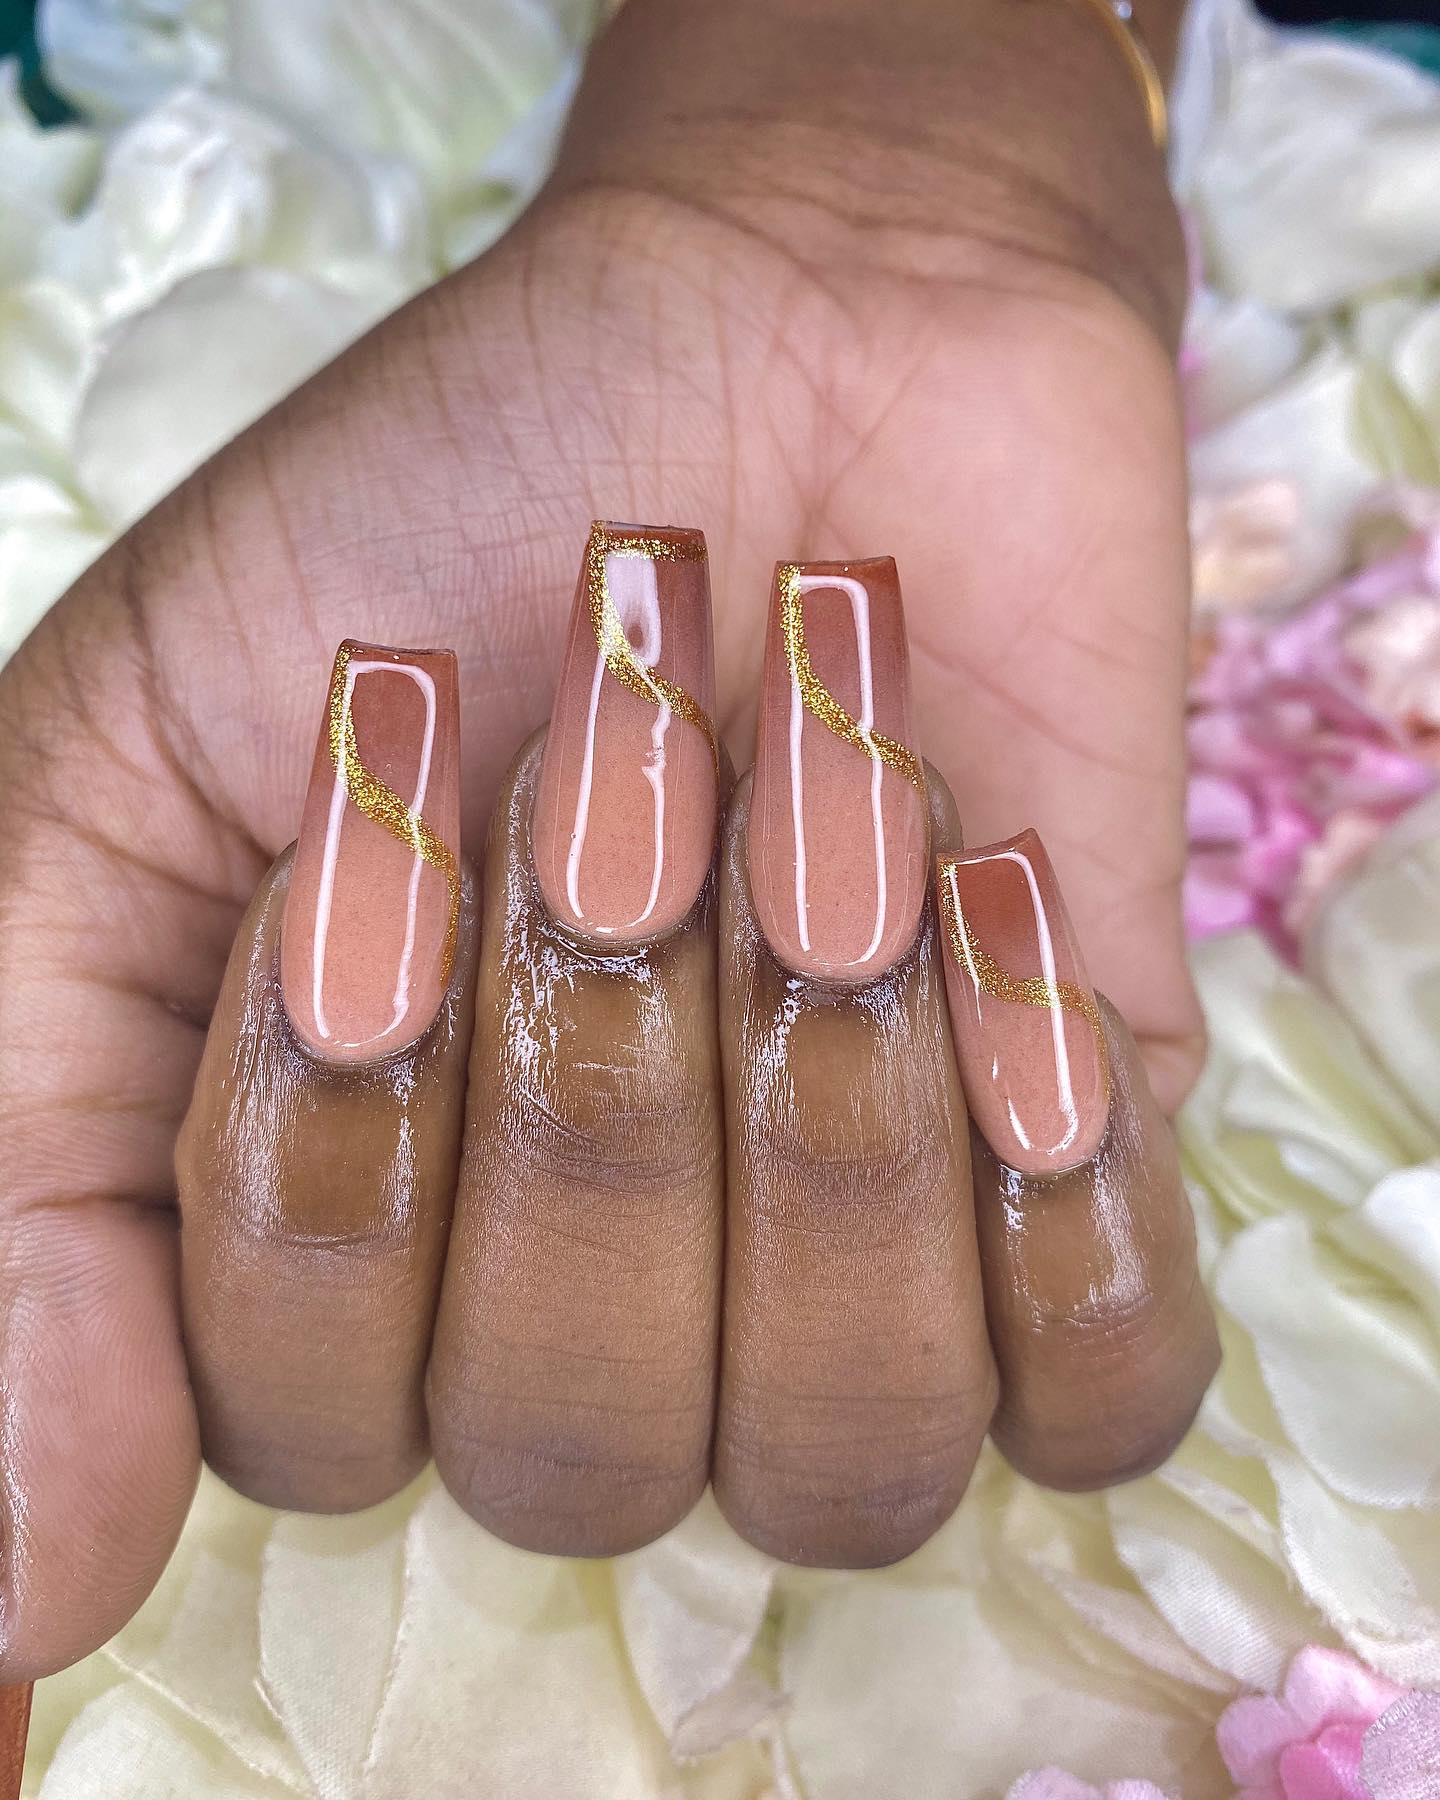 Nude acrylics and this shade of brown will attract a ton of looks and attention. Show them off for your formal and elegant moments.